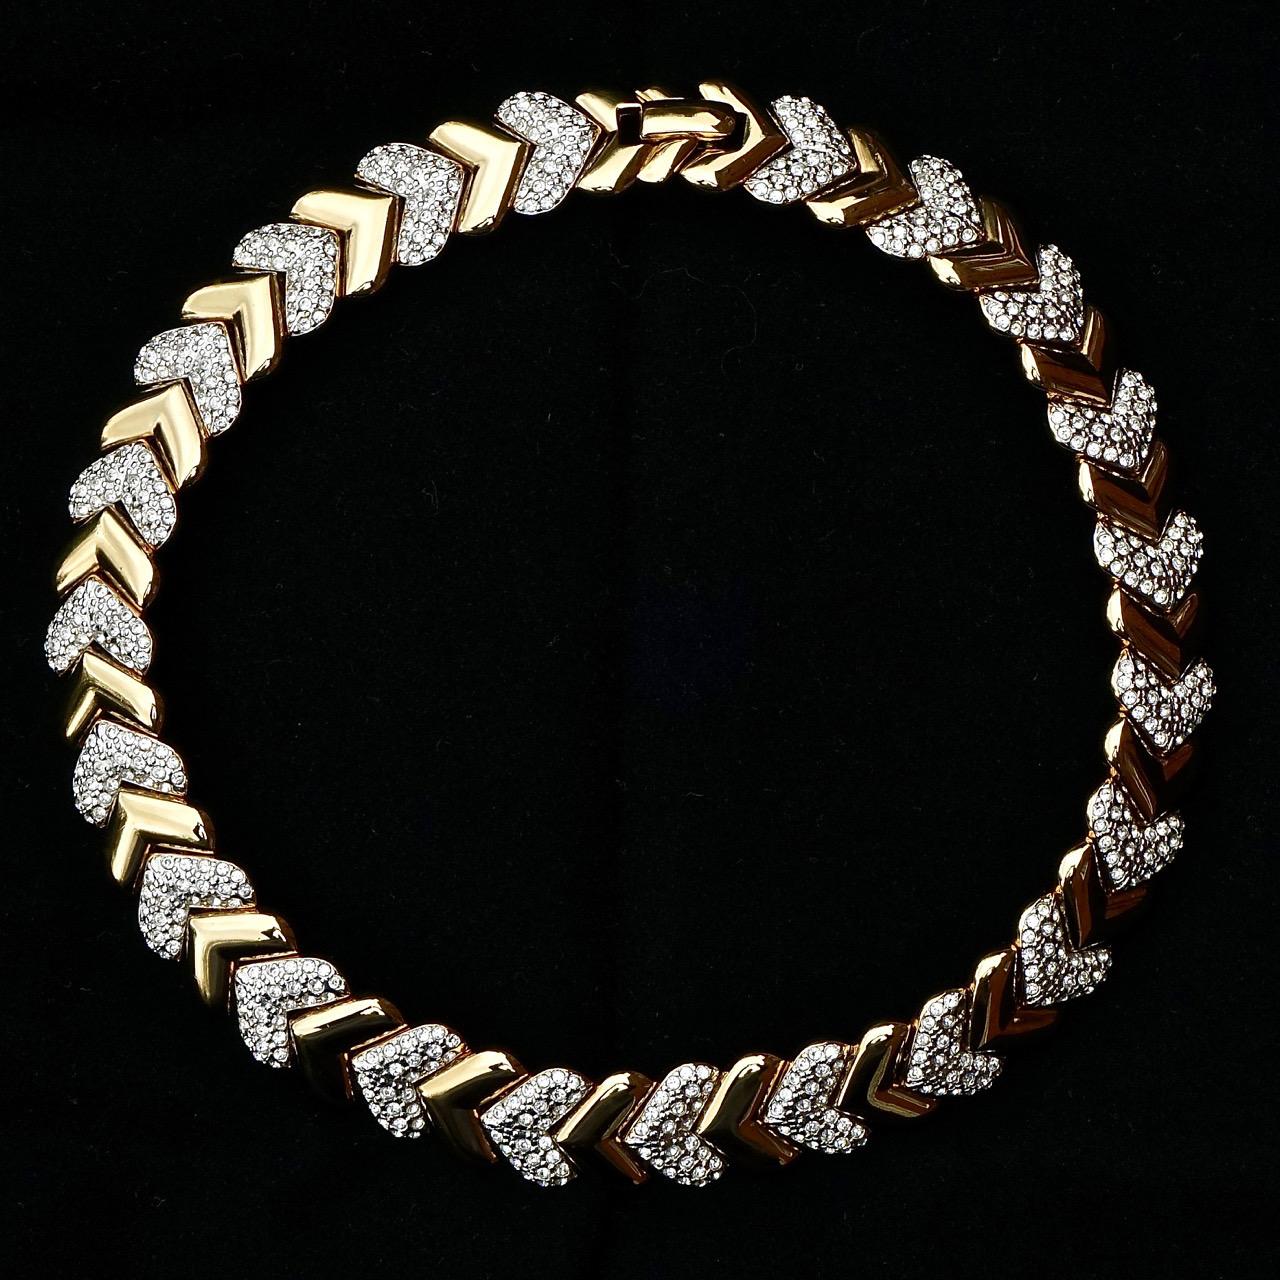 Gold Plated and Rhinestone Heavy Chevron Collar Necklace circa 1980s For Sale 6